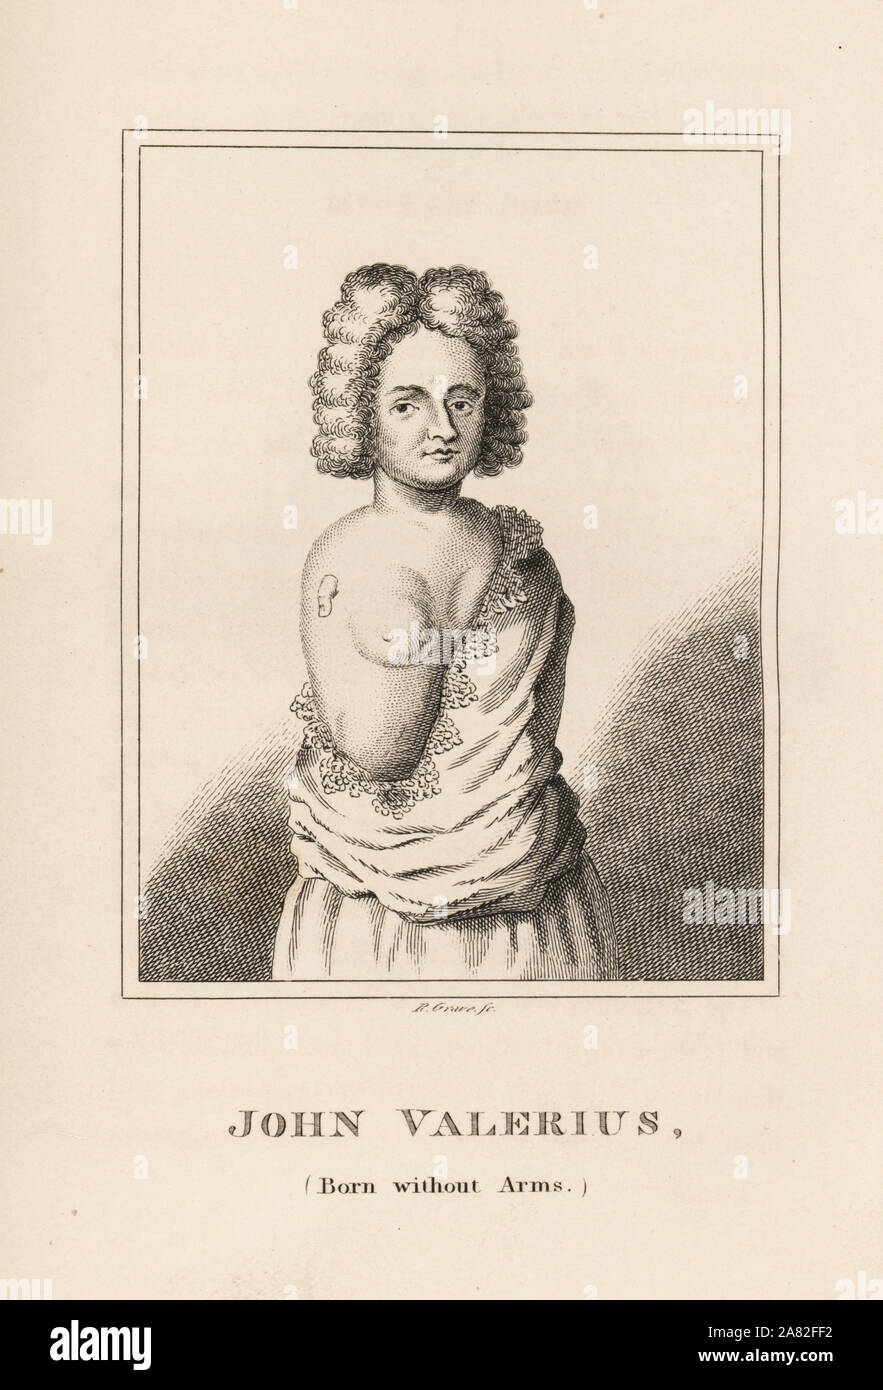 John Valerius, born without arms, exhibited in London from 1698 to 1705. With his feet, he could beat a drum, play cards, shave, fence, fire a pistol, write with a quill, etc. Engraving by R. Grave from James Caulfield's Portraits, Memoirs and Characters of Remarkable Persons, London, 1819. Stock Photo